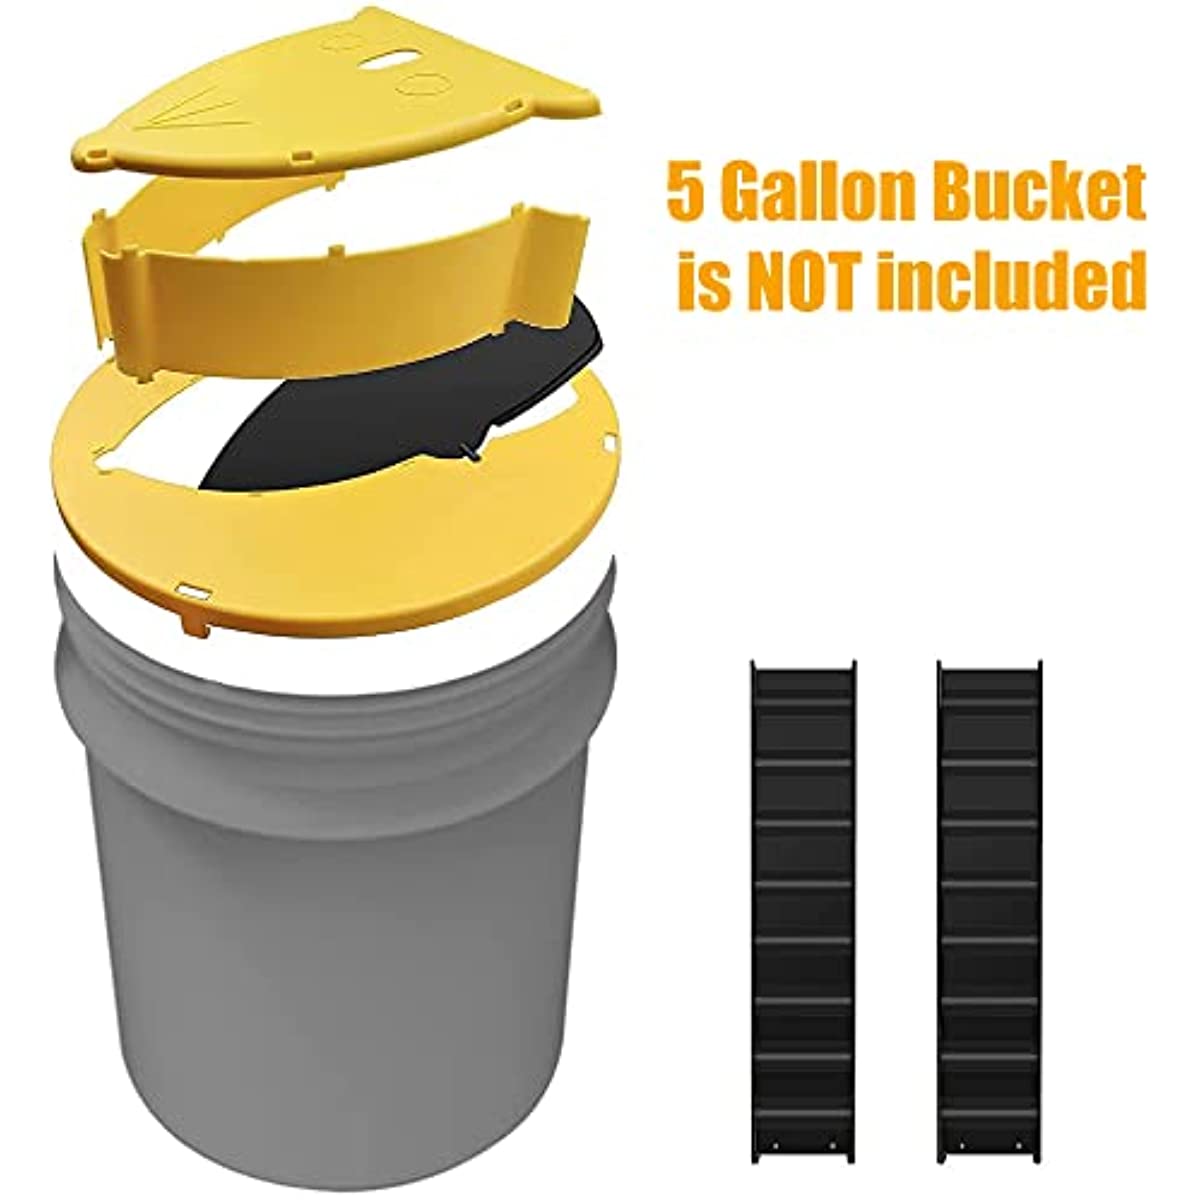 RinneTraps - Flip N Slide Bucket Lid Mouse Trap |Humane or Lethal| |Trap Door Style| |Multi Catch |Auto Reset| |Indoor Outdoor| |No See Kill| |5